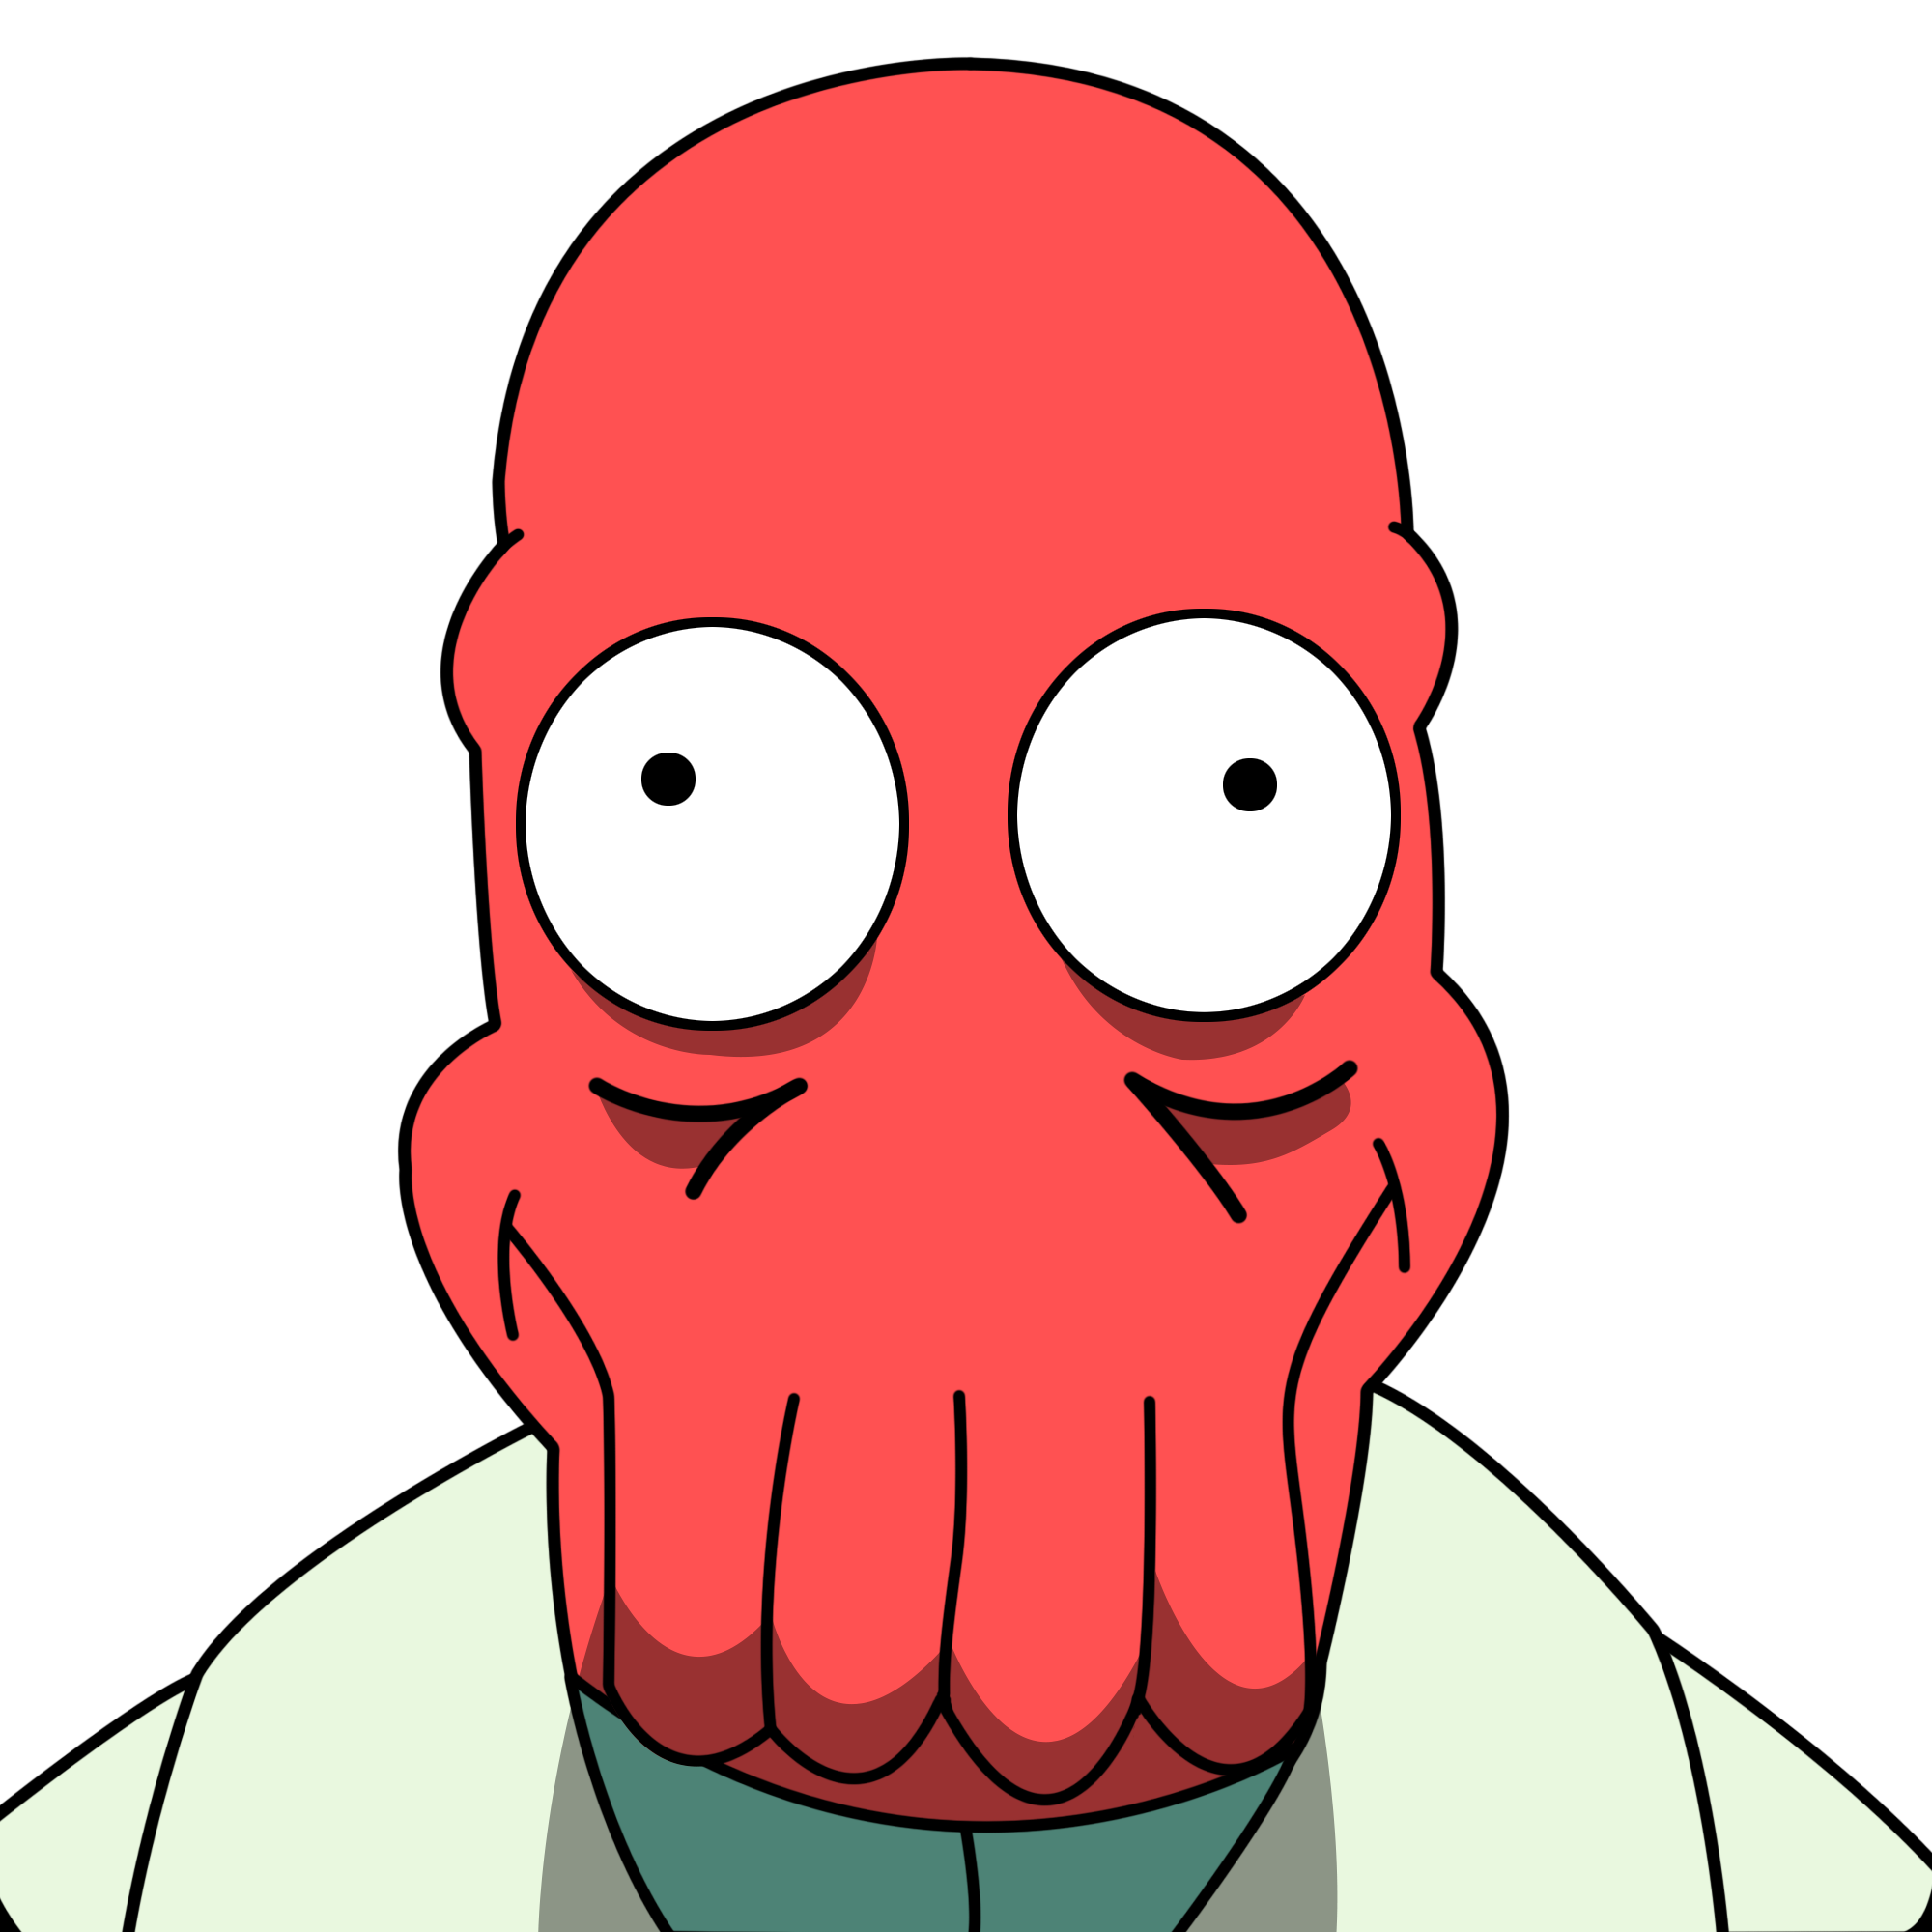 Zoidberg Backgrounds, Compatible - PC, Mobile, Gadgets| 2000x2000 px